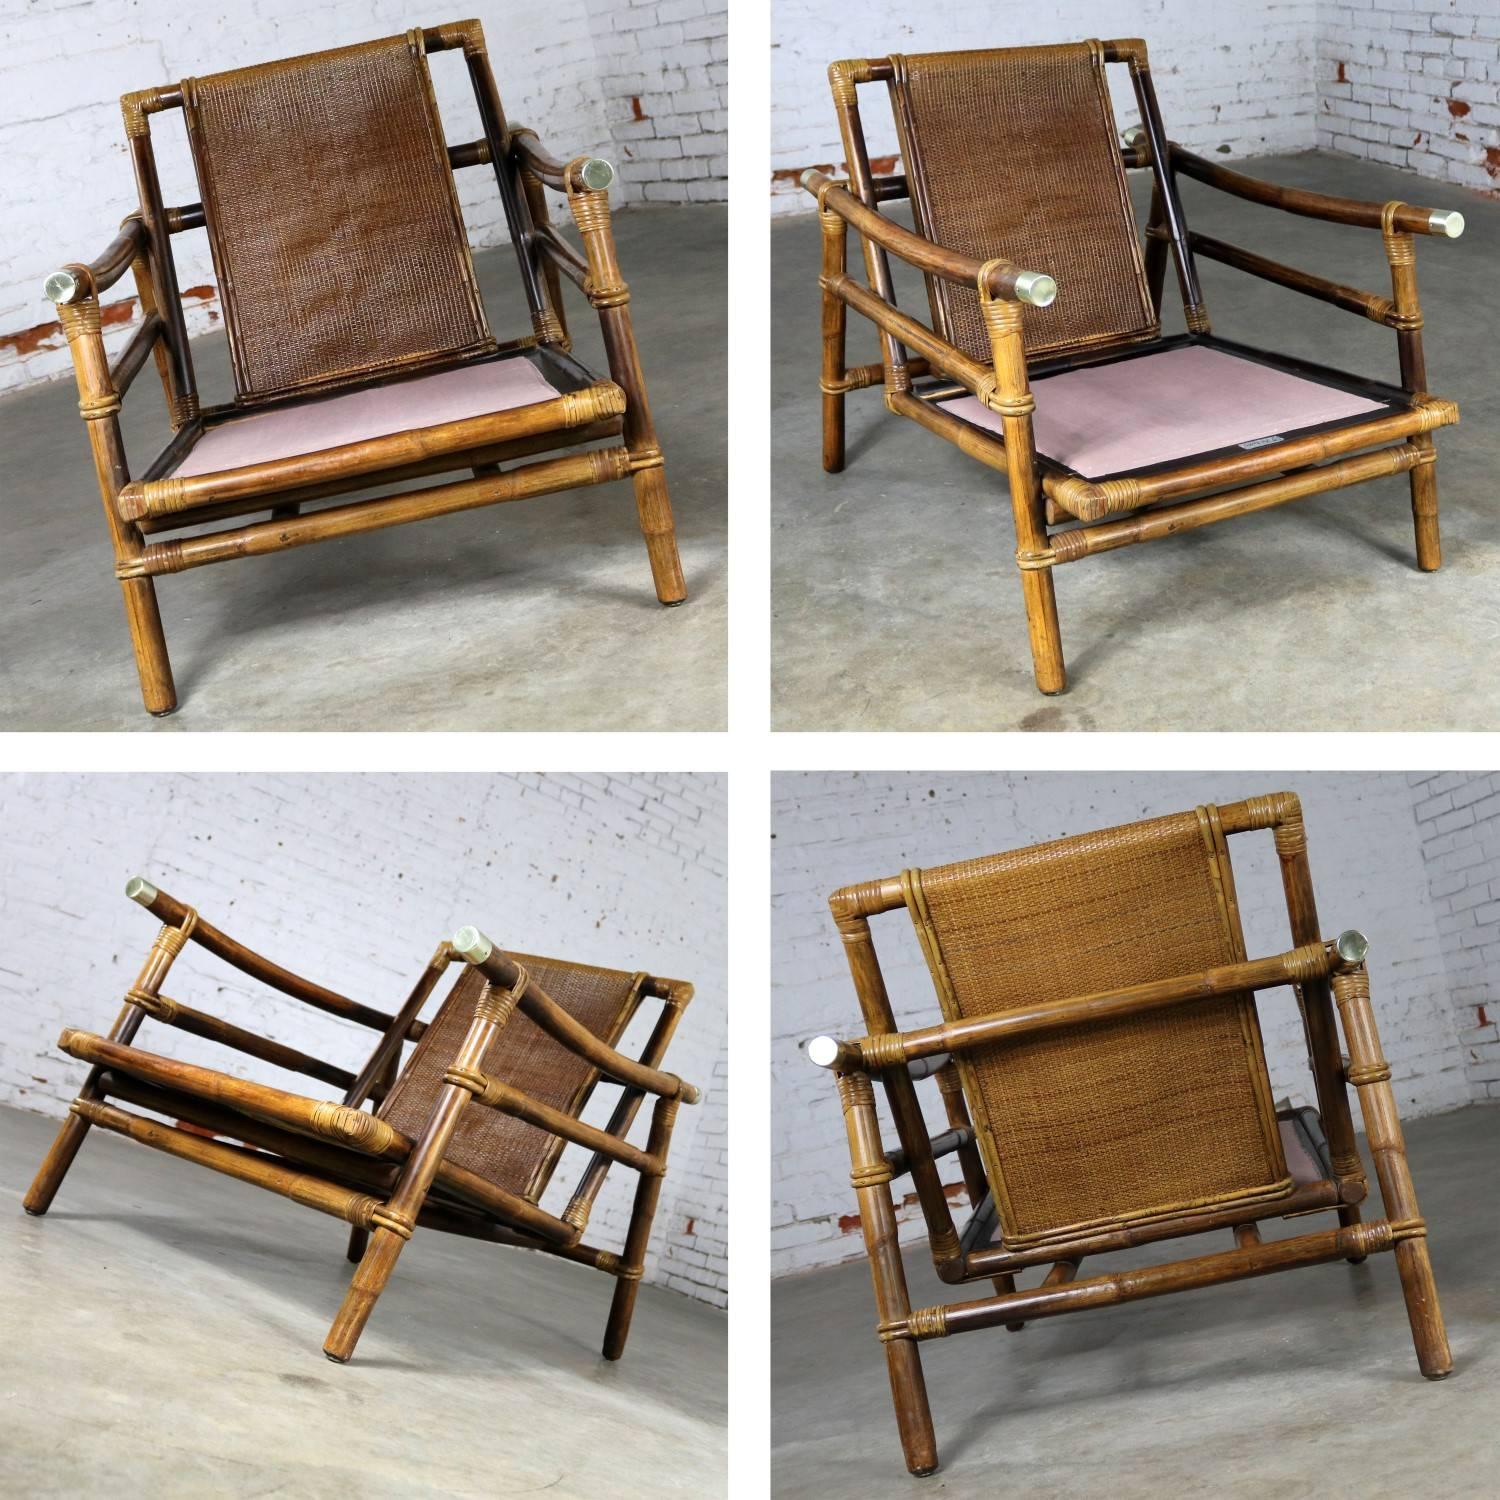 20th Century Ficks Reed Rattan Lounge Club Chair by John Wisner Campaign Style Far East Coll.